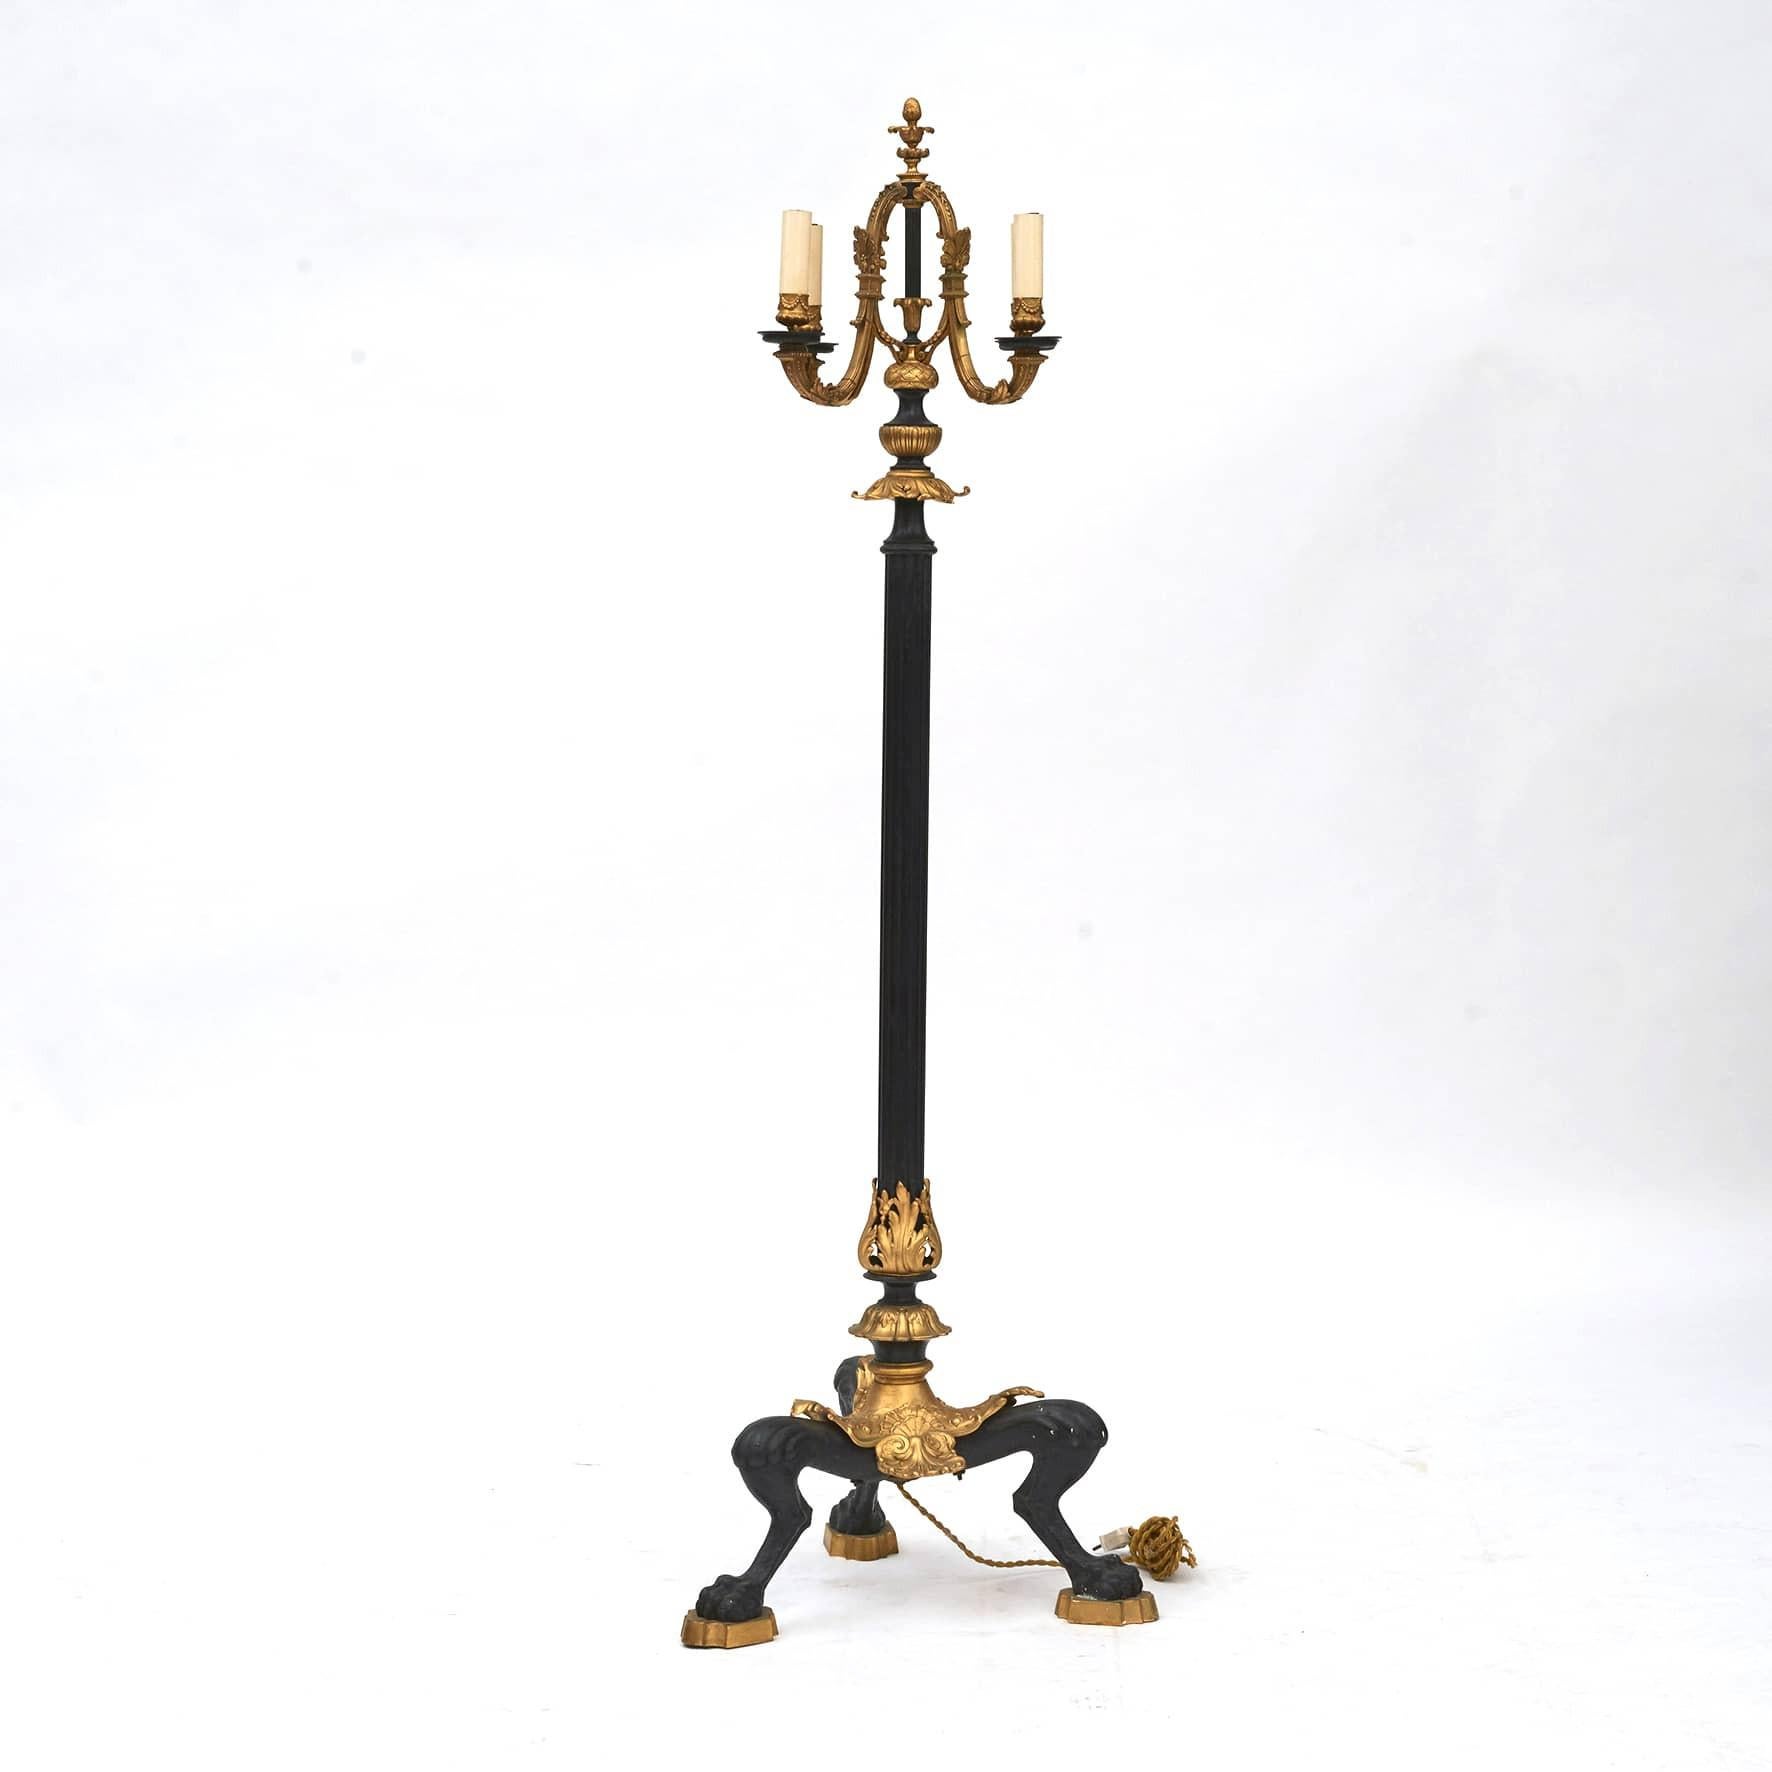 French Louis XVI-style (19th Century) floor lamp.
Gilt and black patinated bronze. 4 candelabra arms, later wired. Resting on a tripod base with each leg ending in paw feet.
Finely details throughout.
Napoleon III, France 1860-1870.
 